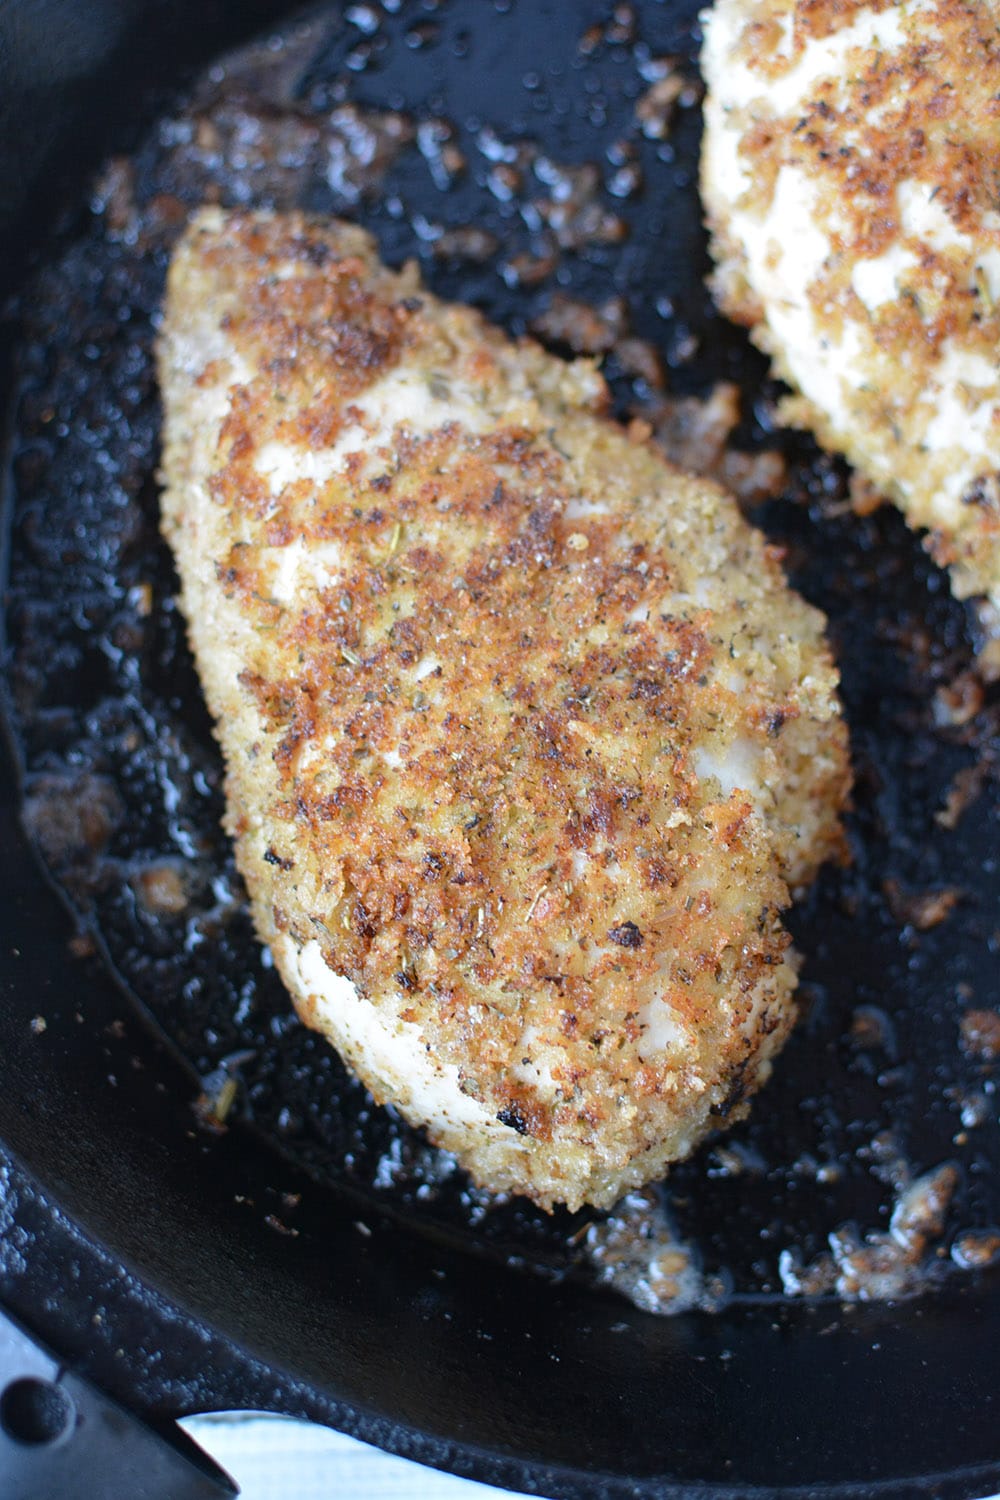 Chicken coated with bread crumbs frying in pan.